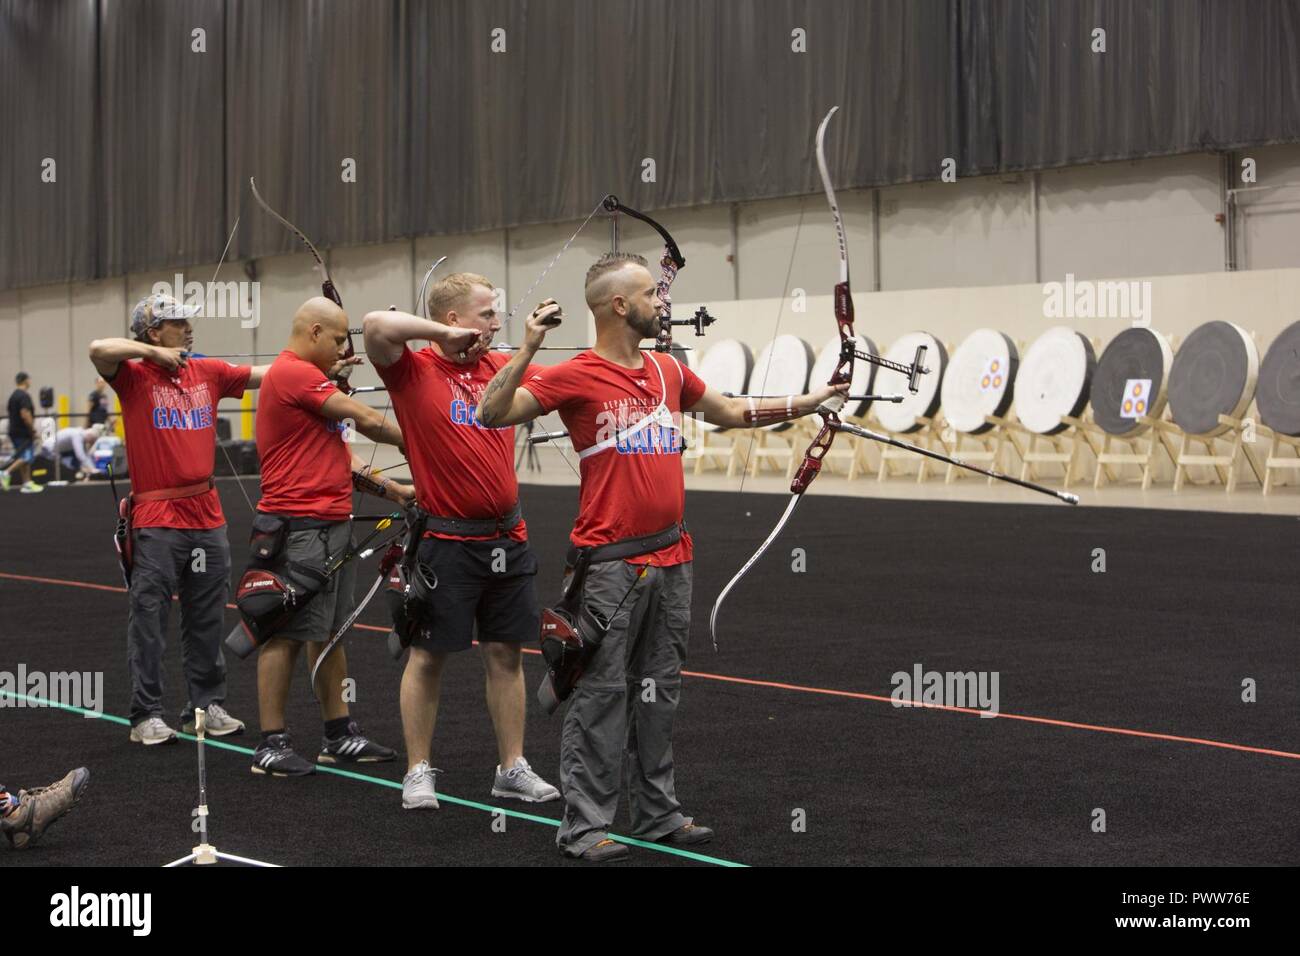 2017 DoD Warrior Games Team Marine Corps archers send arrows downrange during a Warrior Games practice at McCormick Place in Chicago, June 29, 2017. The Warrior Games is an adaptive sports competition for wounded, ill and injured service members and veterans. Stock Photo